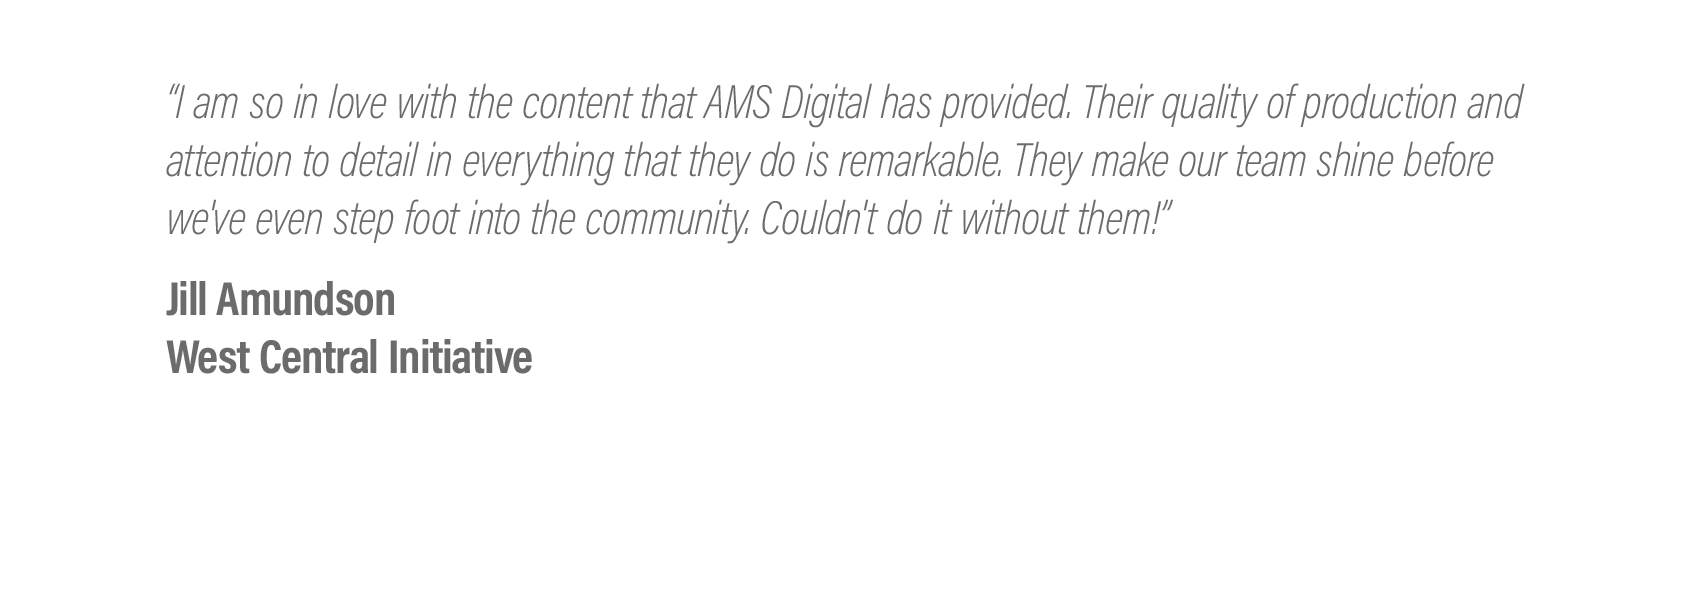  “I am so in love with the content that AMS Digital has provided. Their quality of production and attention to detail in everything that they do is remarkable. They make our team shine before we've even step foot into the community. Couldn't do it wi